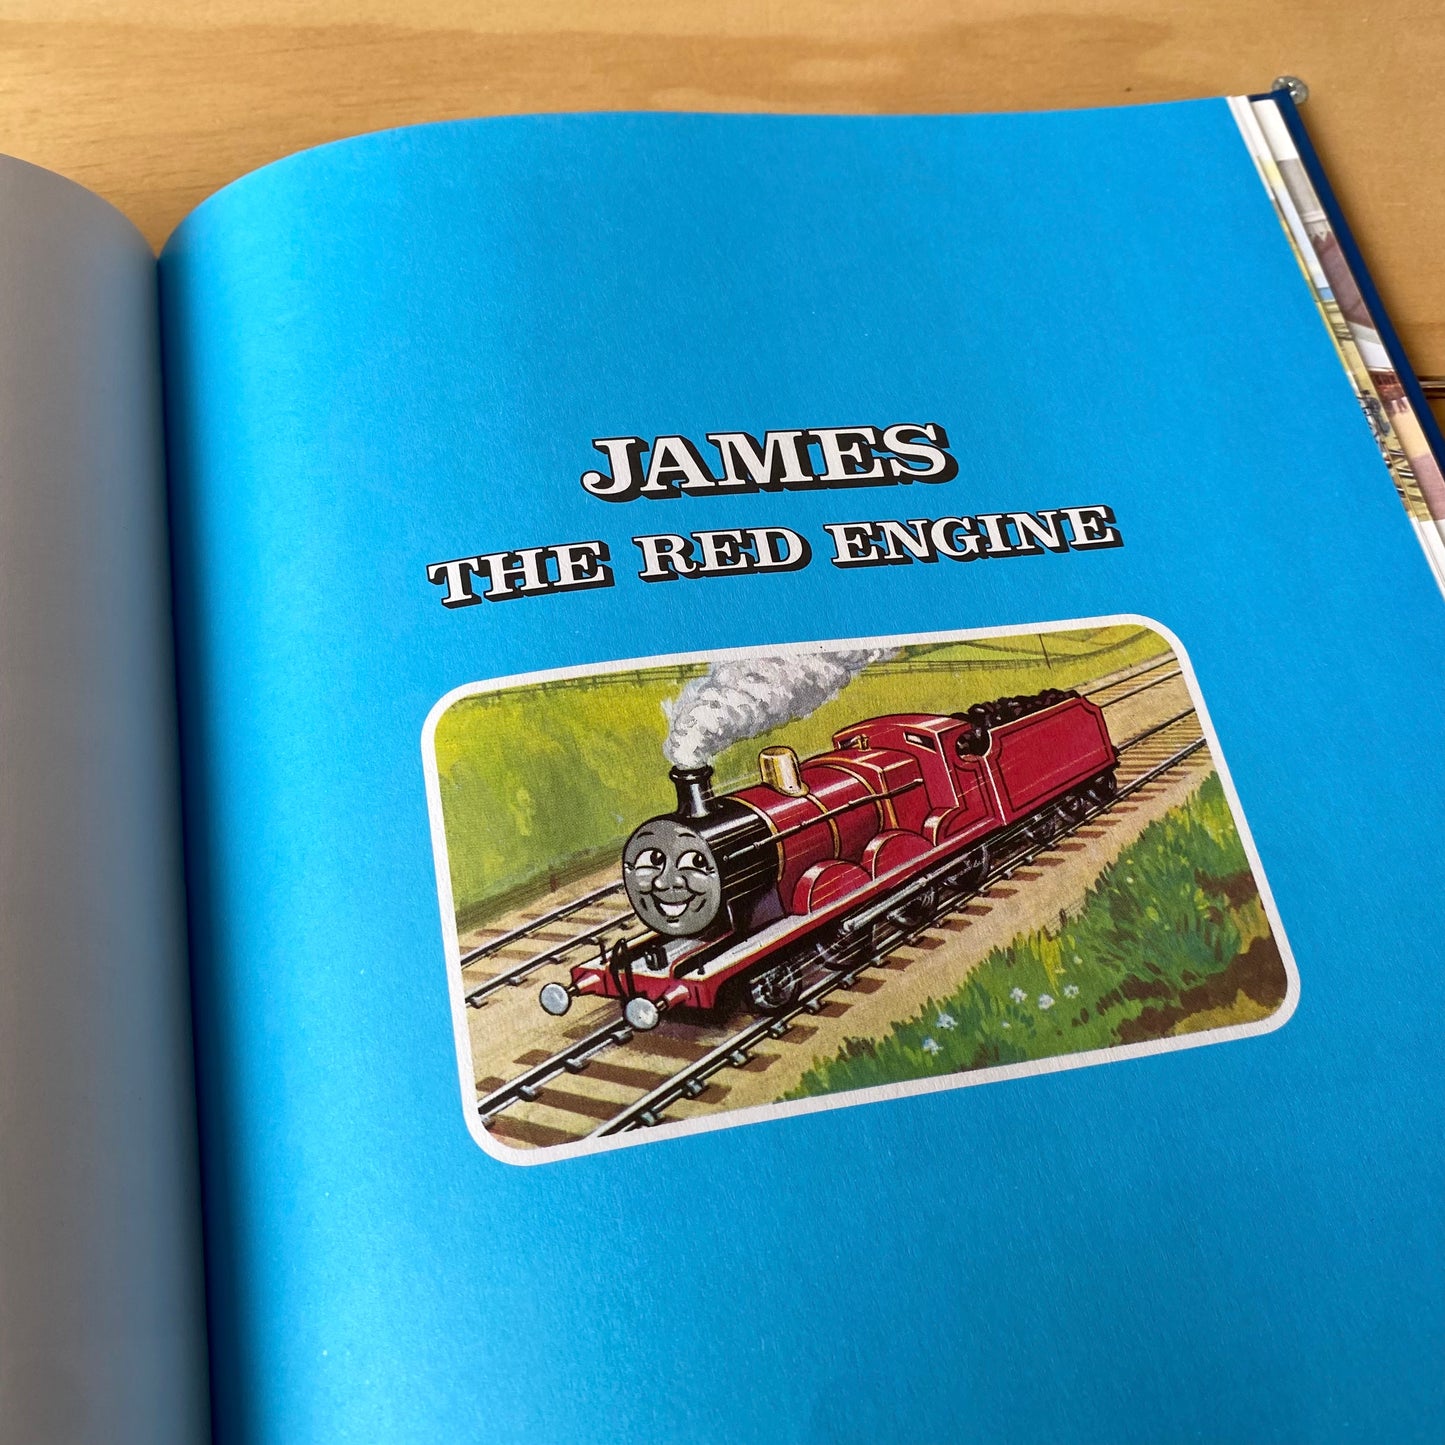 Thomas the Tank Engine Stories: 20 Classic Stories in One Volume / Rev W Awdry, John T Kenney